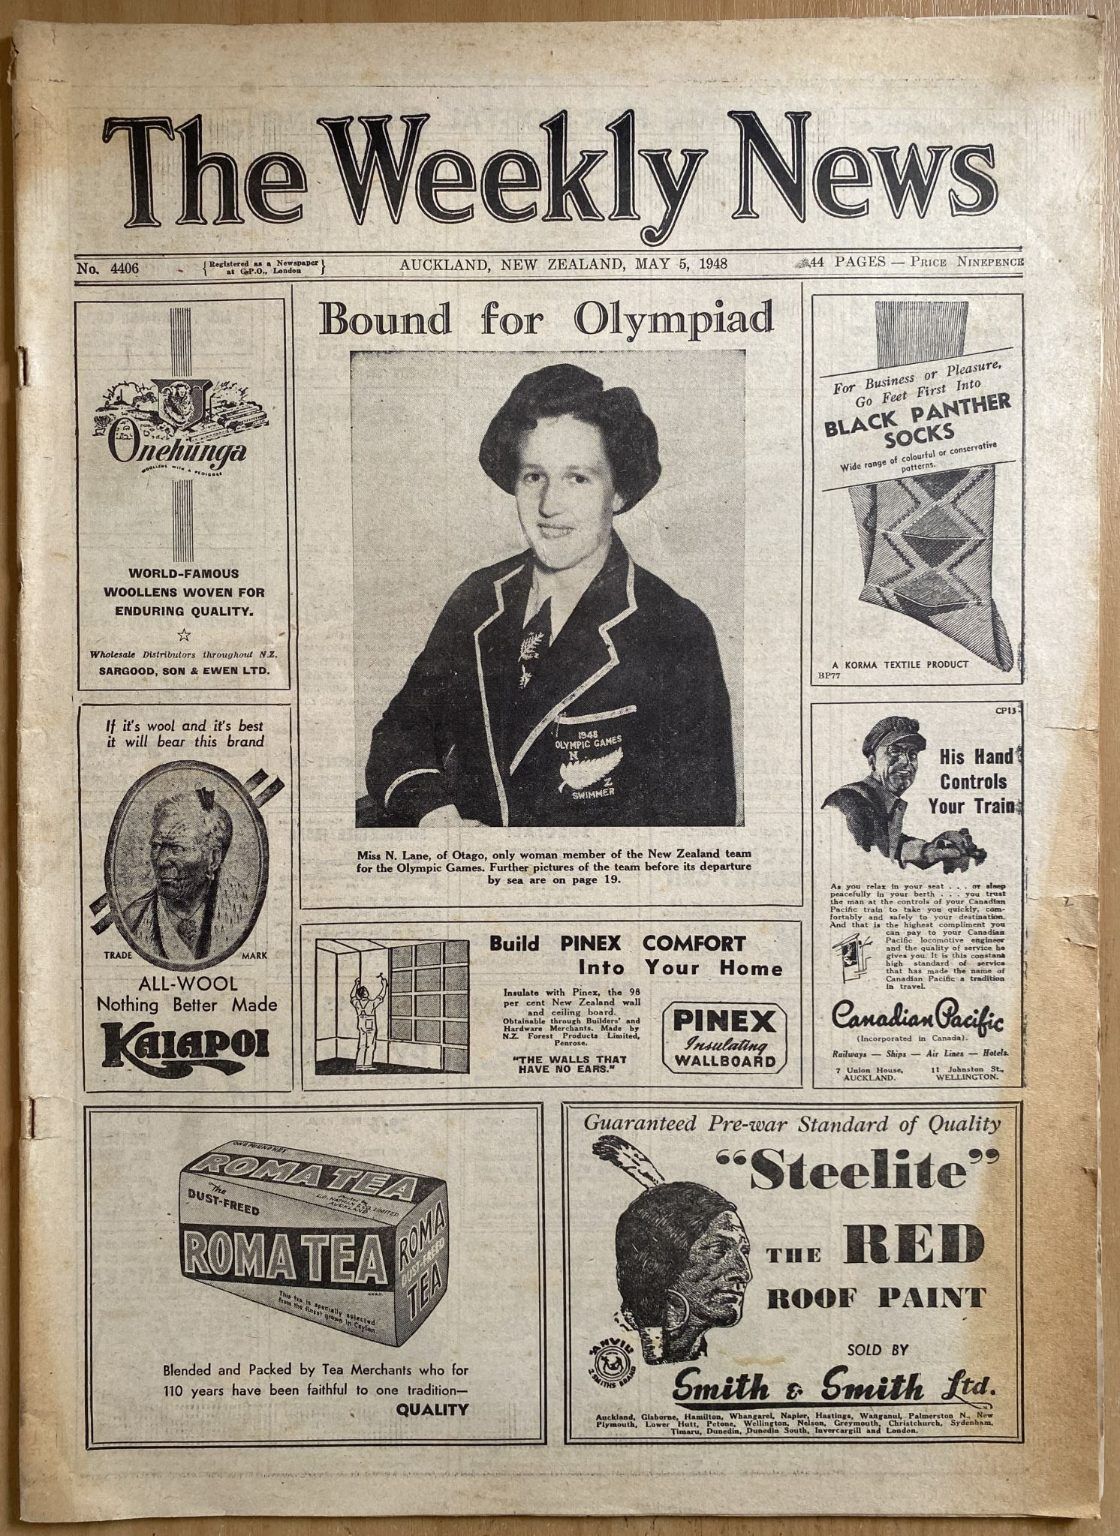 OLD NEWSPAPER: The Weekly News - No. 4406, 5 May 1948